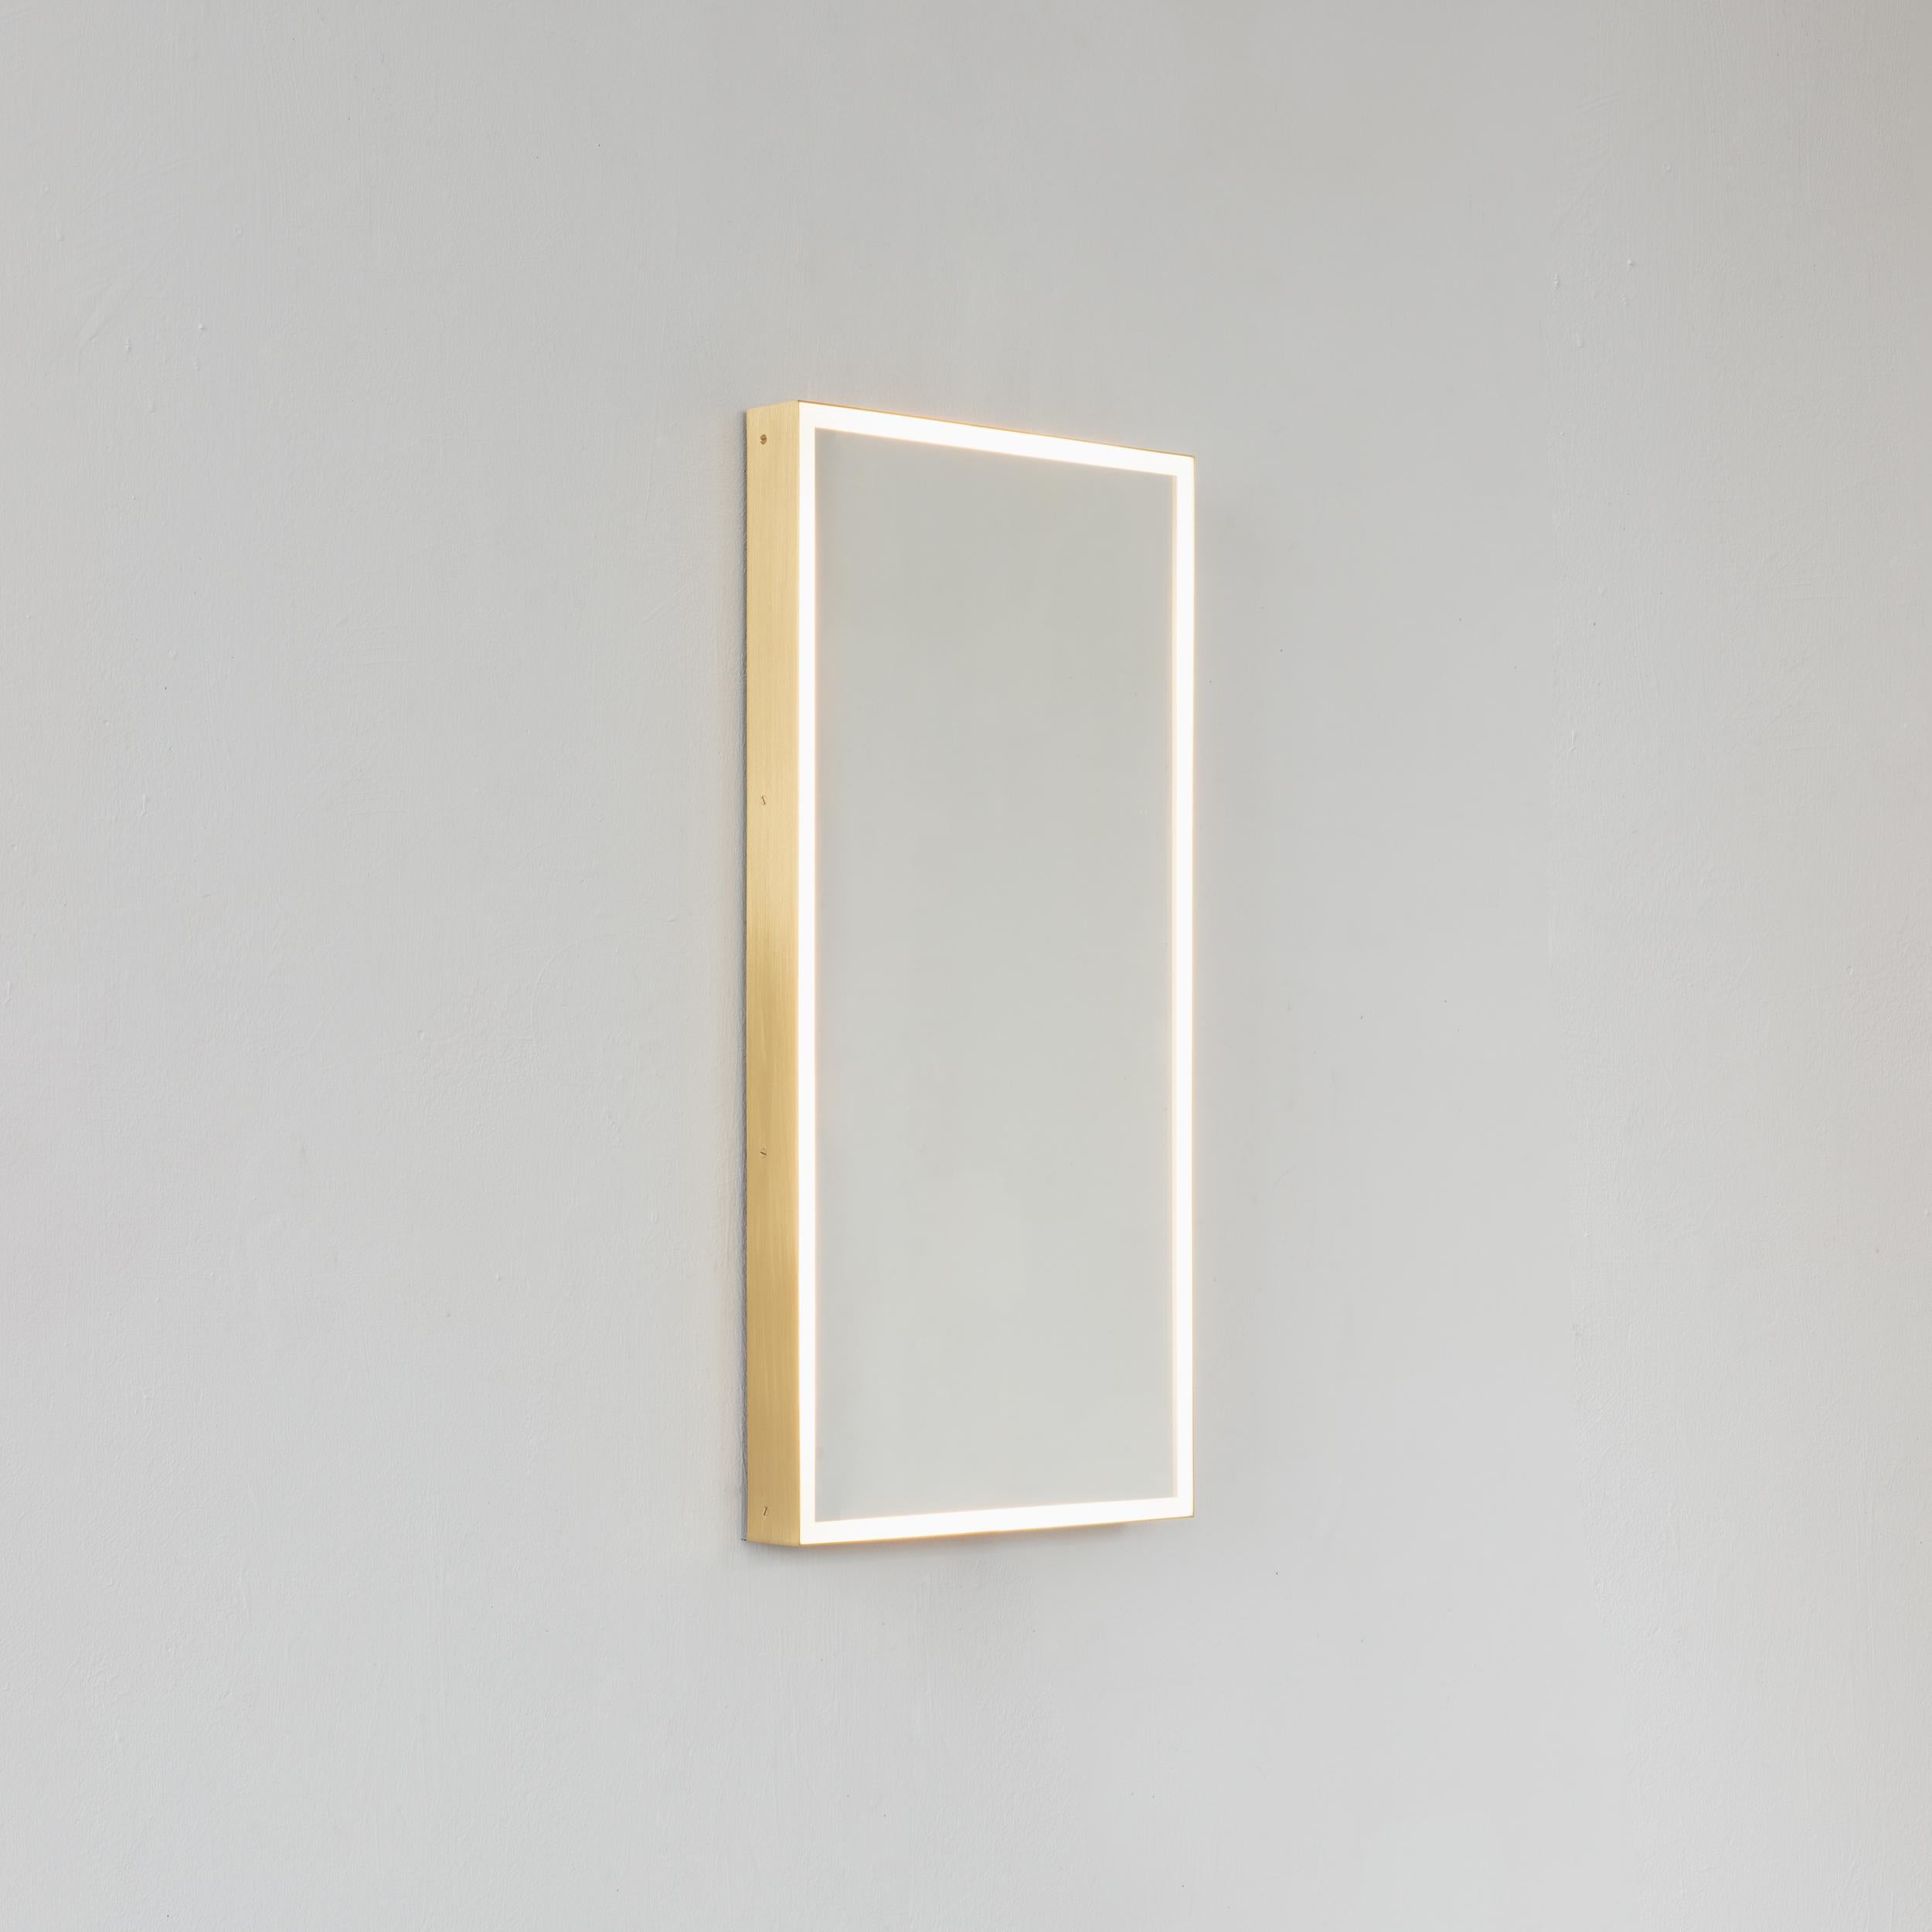 Elegant and timeless, our front illuminated Quadris™ mirror with square corners and a solid brushed brass frame is part of our charming Quadris™ collection, designed and handcrafted in London, UK. 

Illustrated here in a small size, the illumination